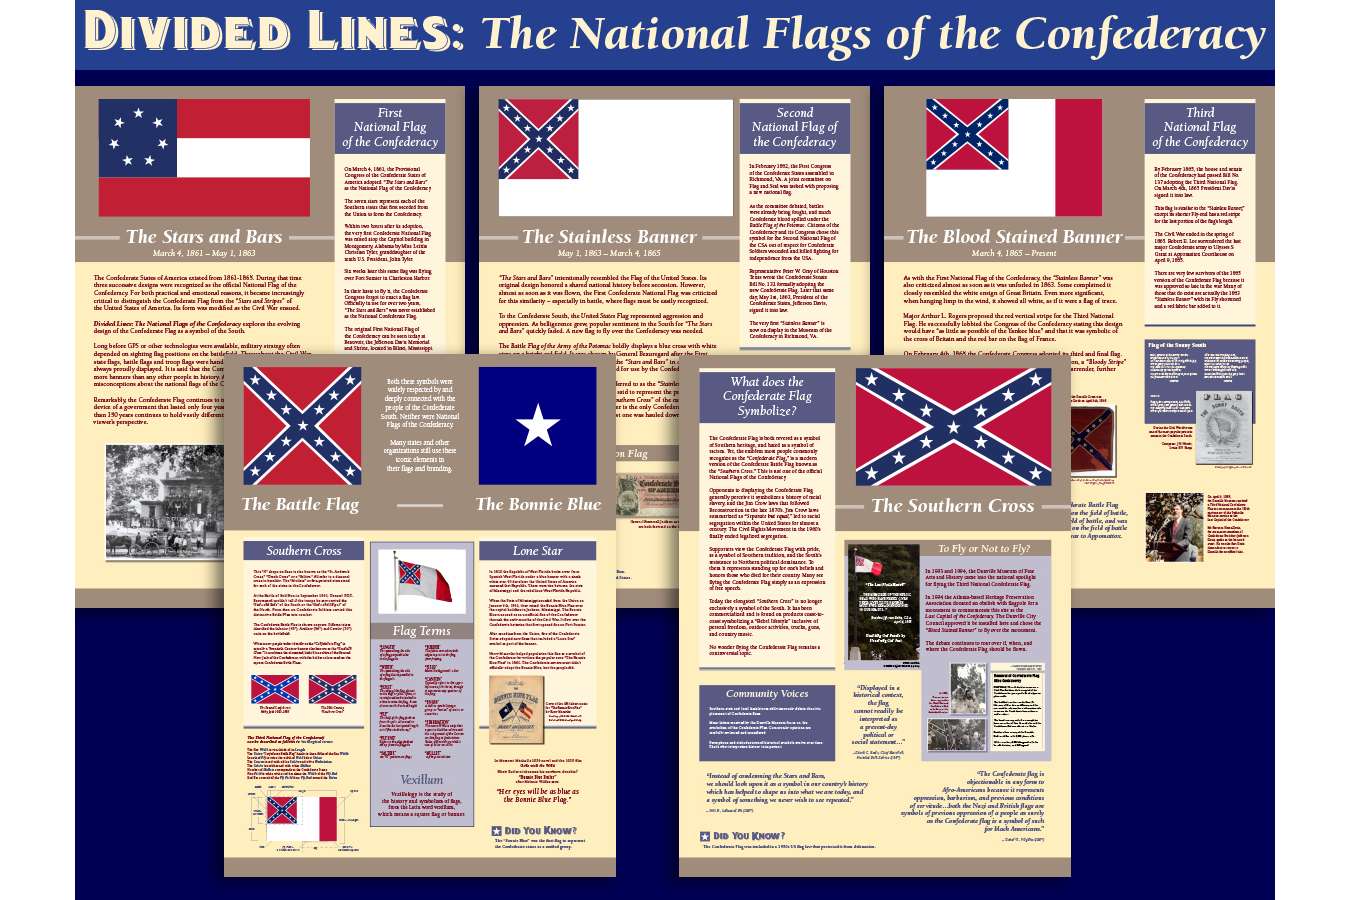 DMFAH 2 Flag 5 Panes : Vexillology is the study of the history and symbolism of flags, from the Latin word Vexillum, which means a square flag or banner. The exhibit briefly presents the many threads of symbology, history, popular opinion and practicality woven into the design of the Confederate Flag.